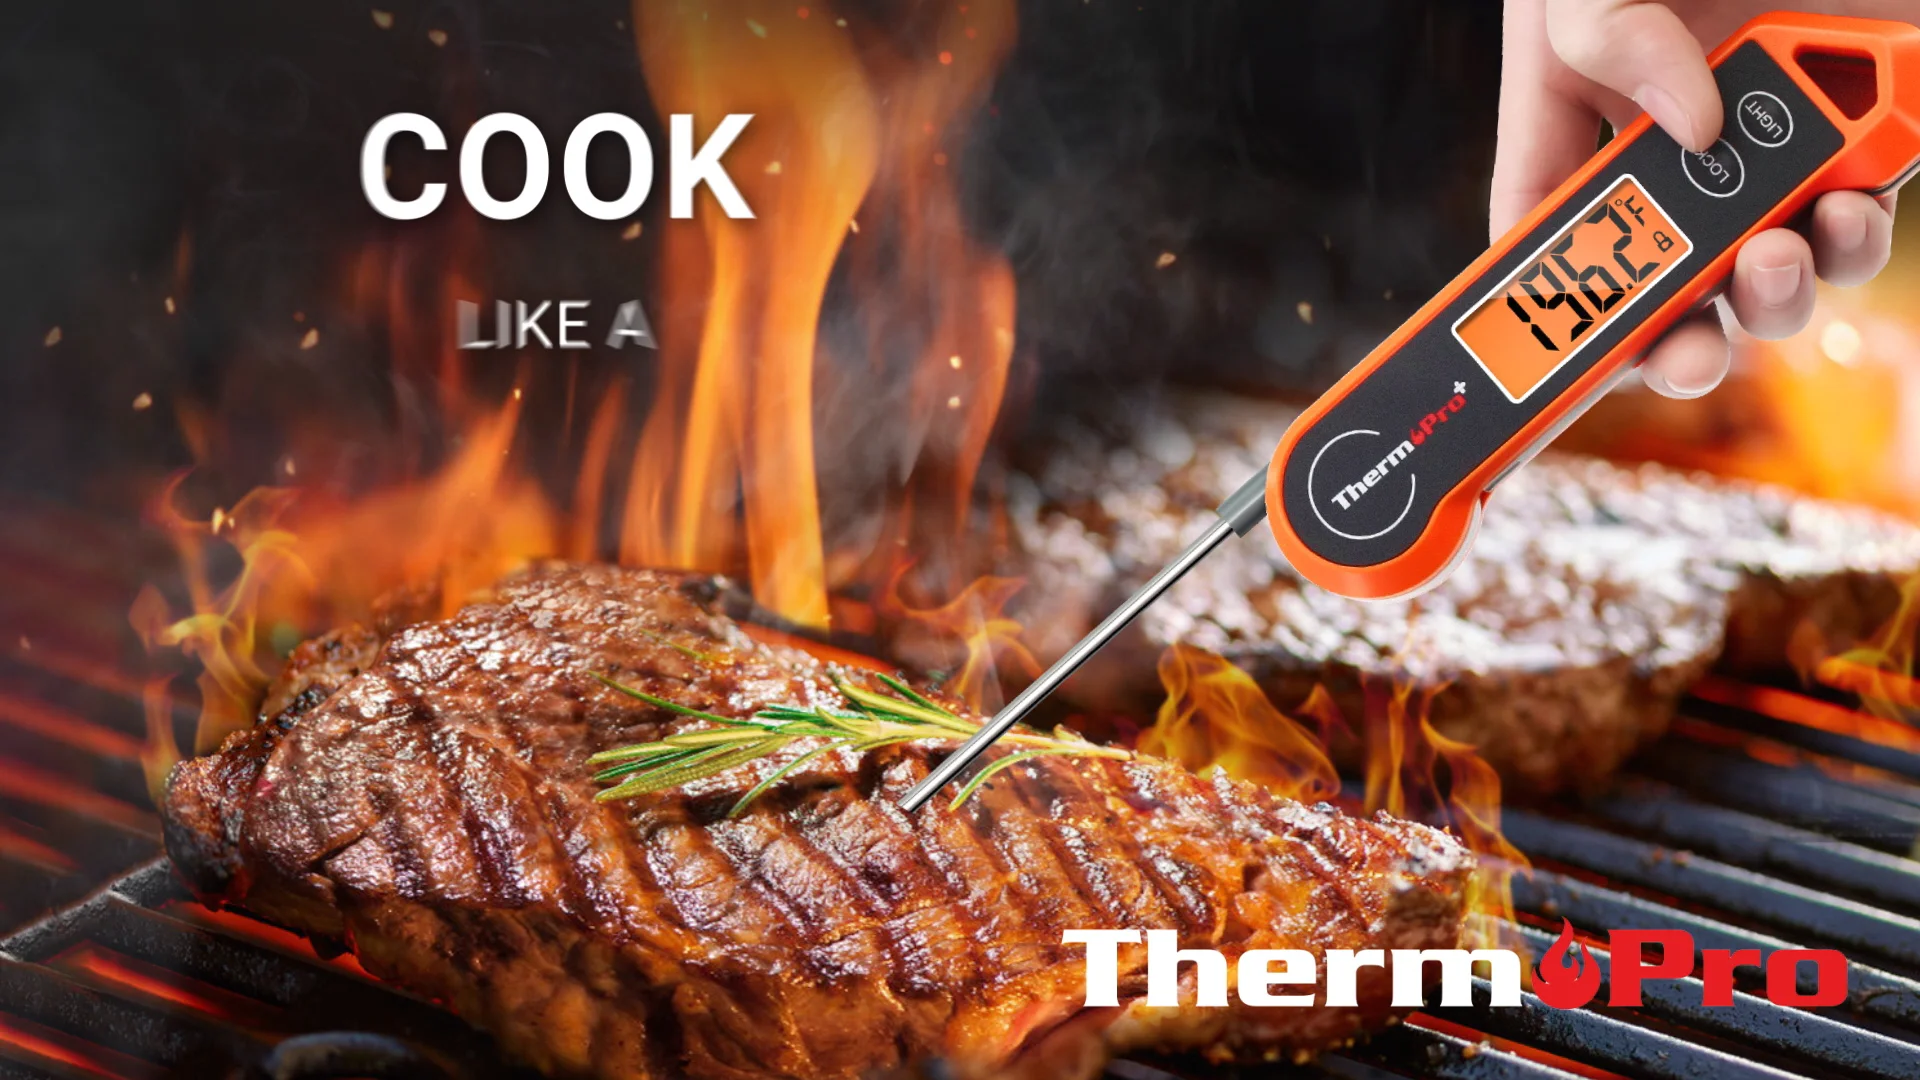  ThermoPro TP19H Waterproof Digital Meat Thermometer